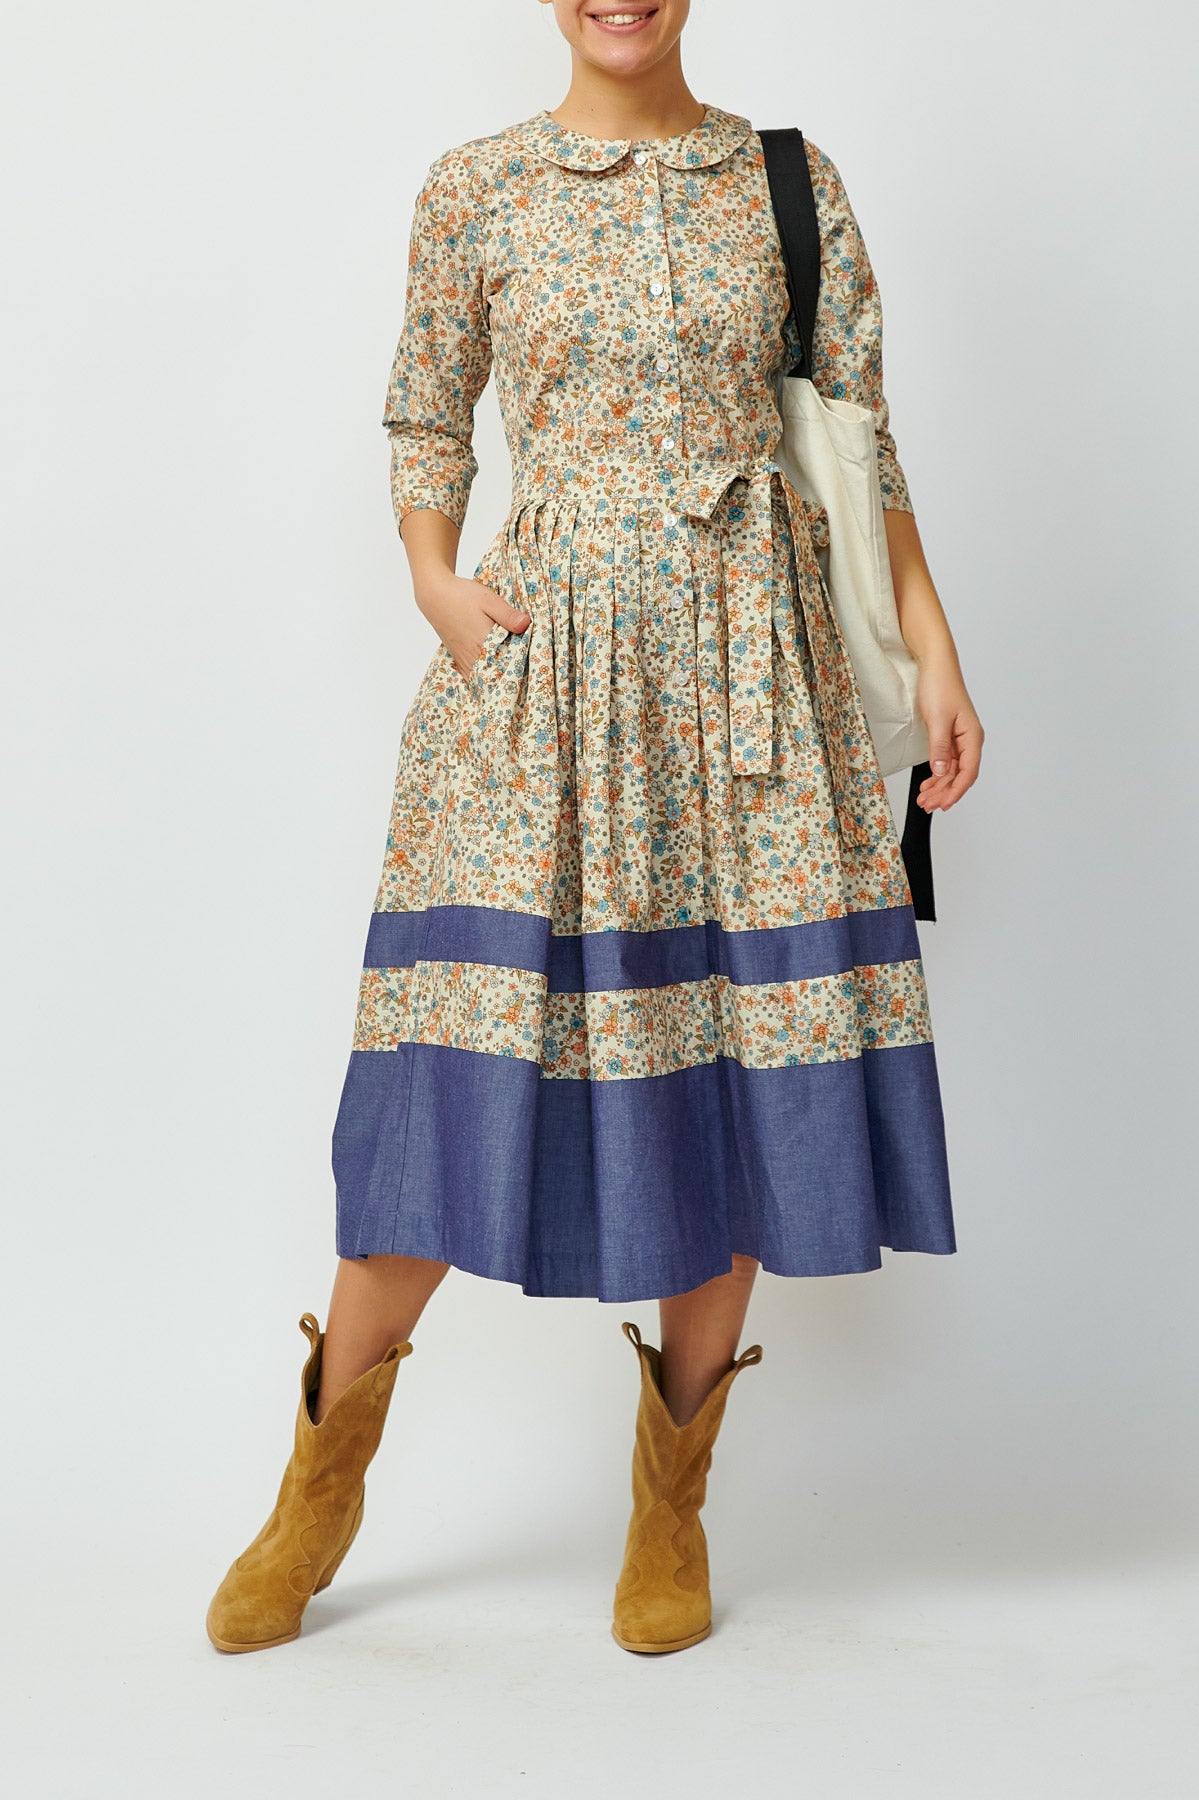 Shirt dress in small flowers and with a navy blue border